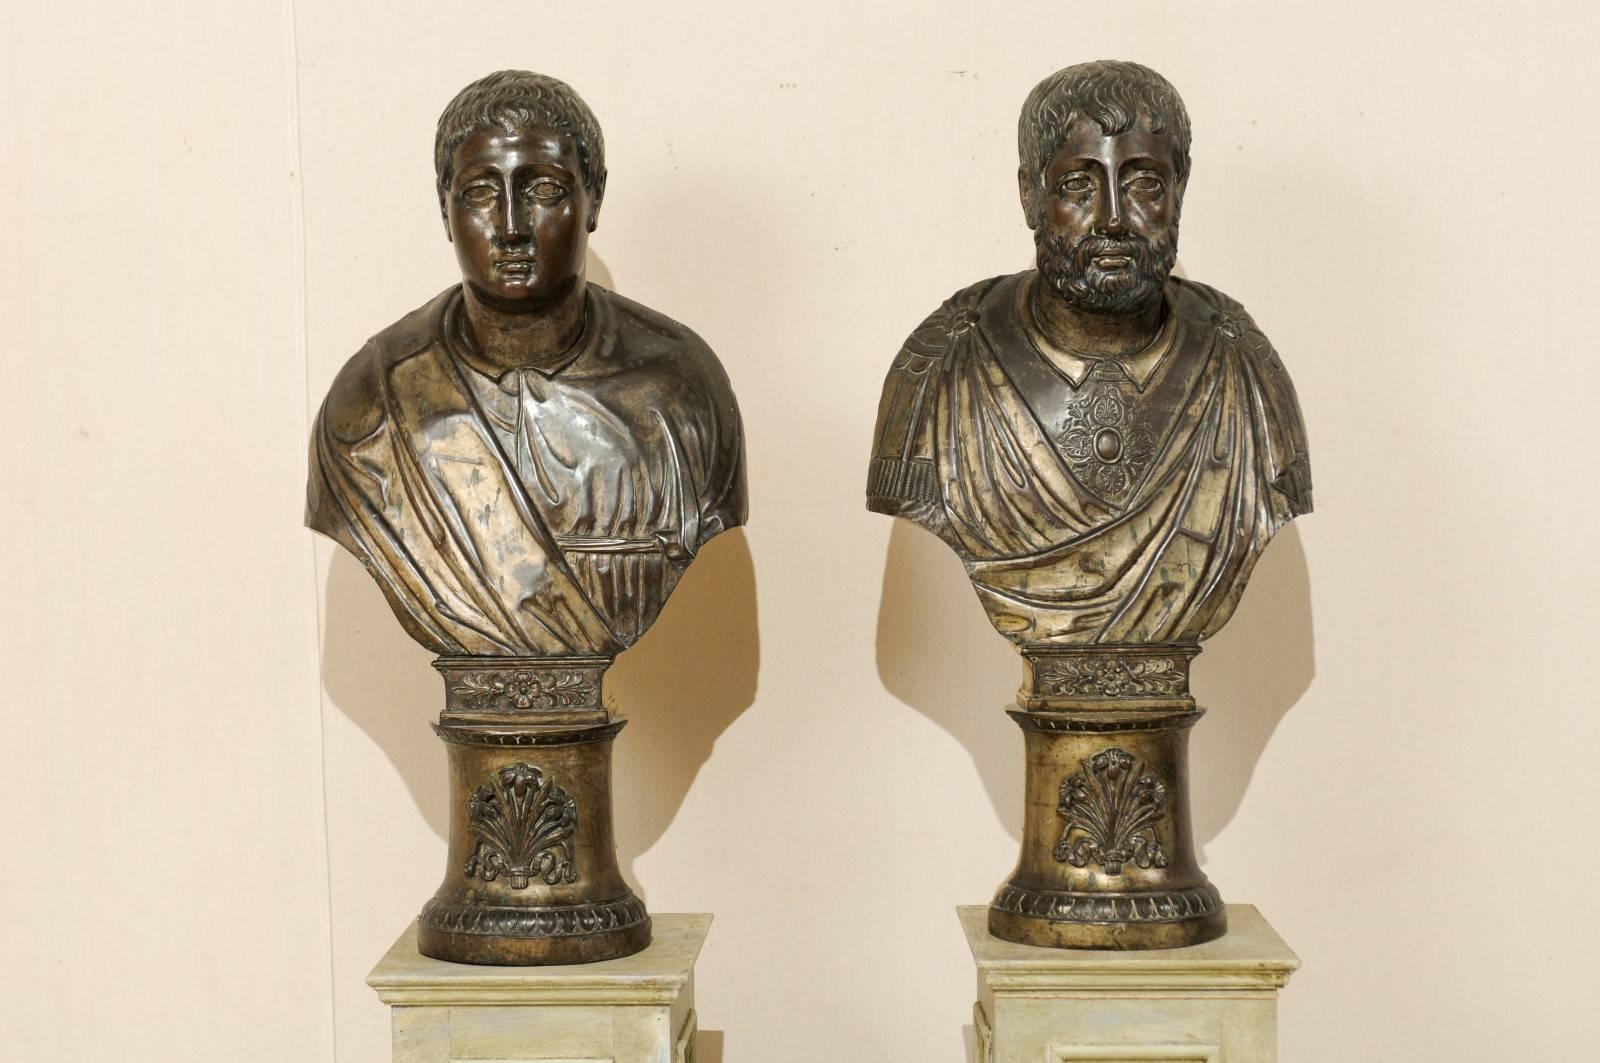 Pair of Italian 19th Century Roman Senator Busts of Repoussé Copper or Wood For Sale 2